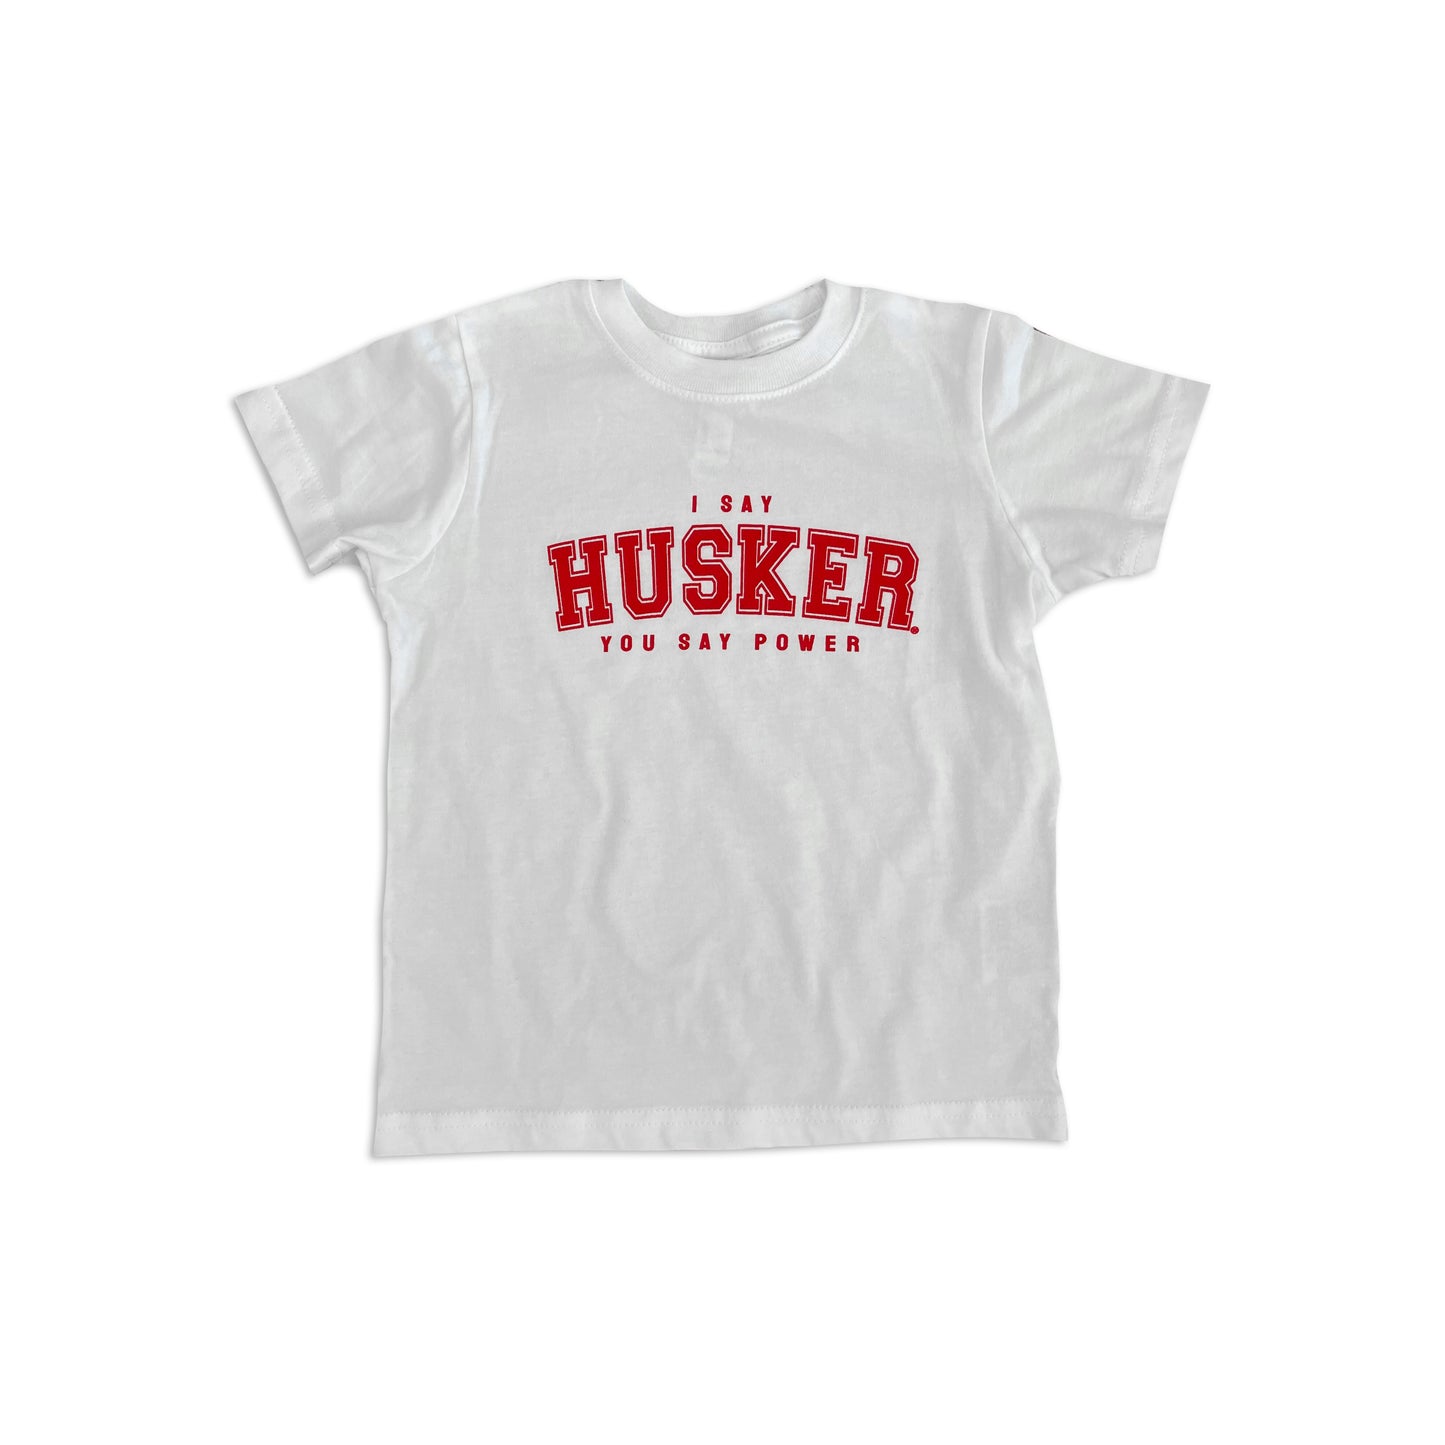 When I Say Husker toddler tee